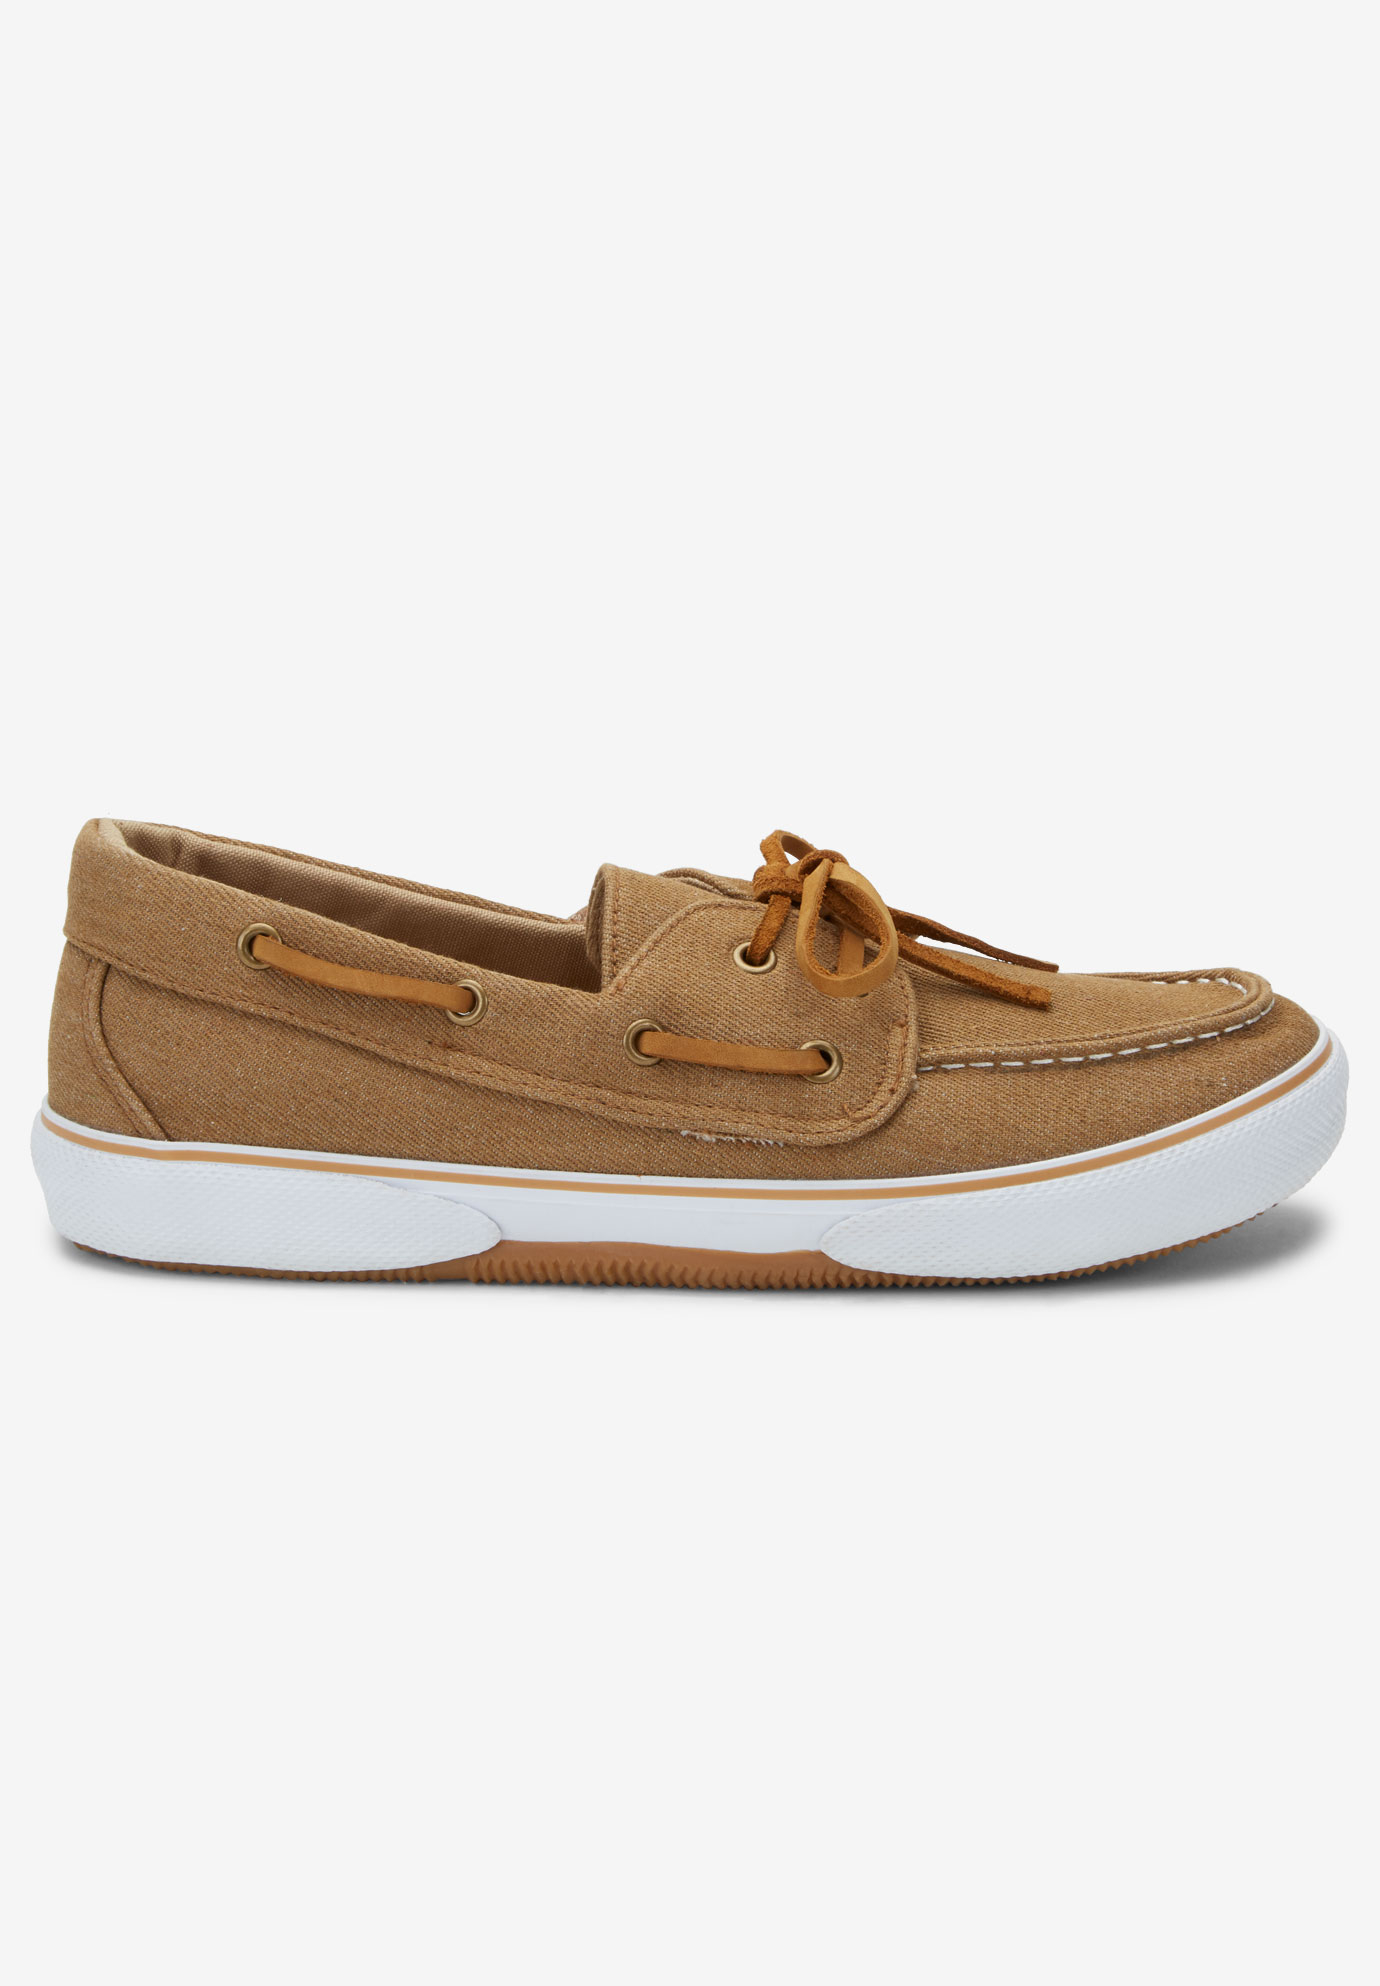 Kingsize Men's Big & Tall Canvas Boat Shoe Loafers Shoes - image 2 of 6